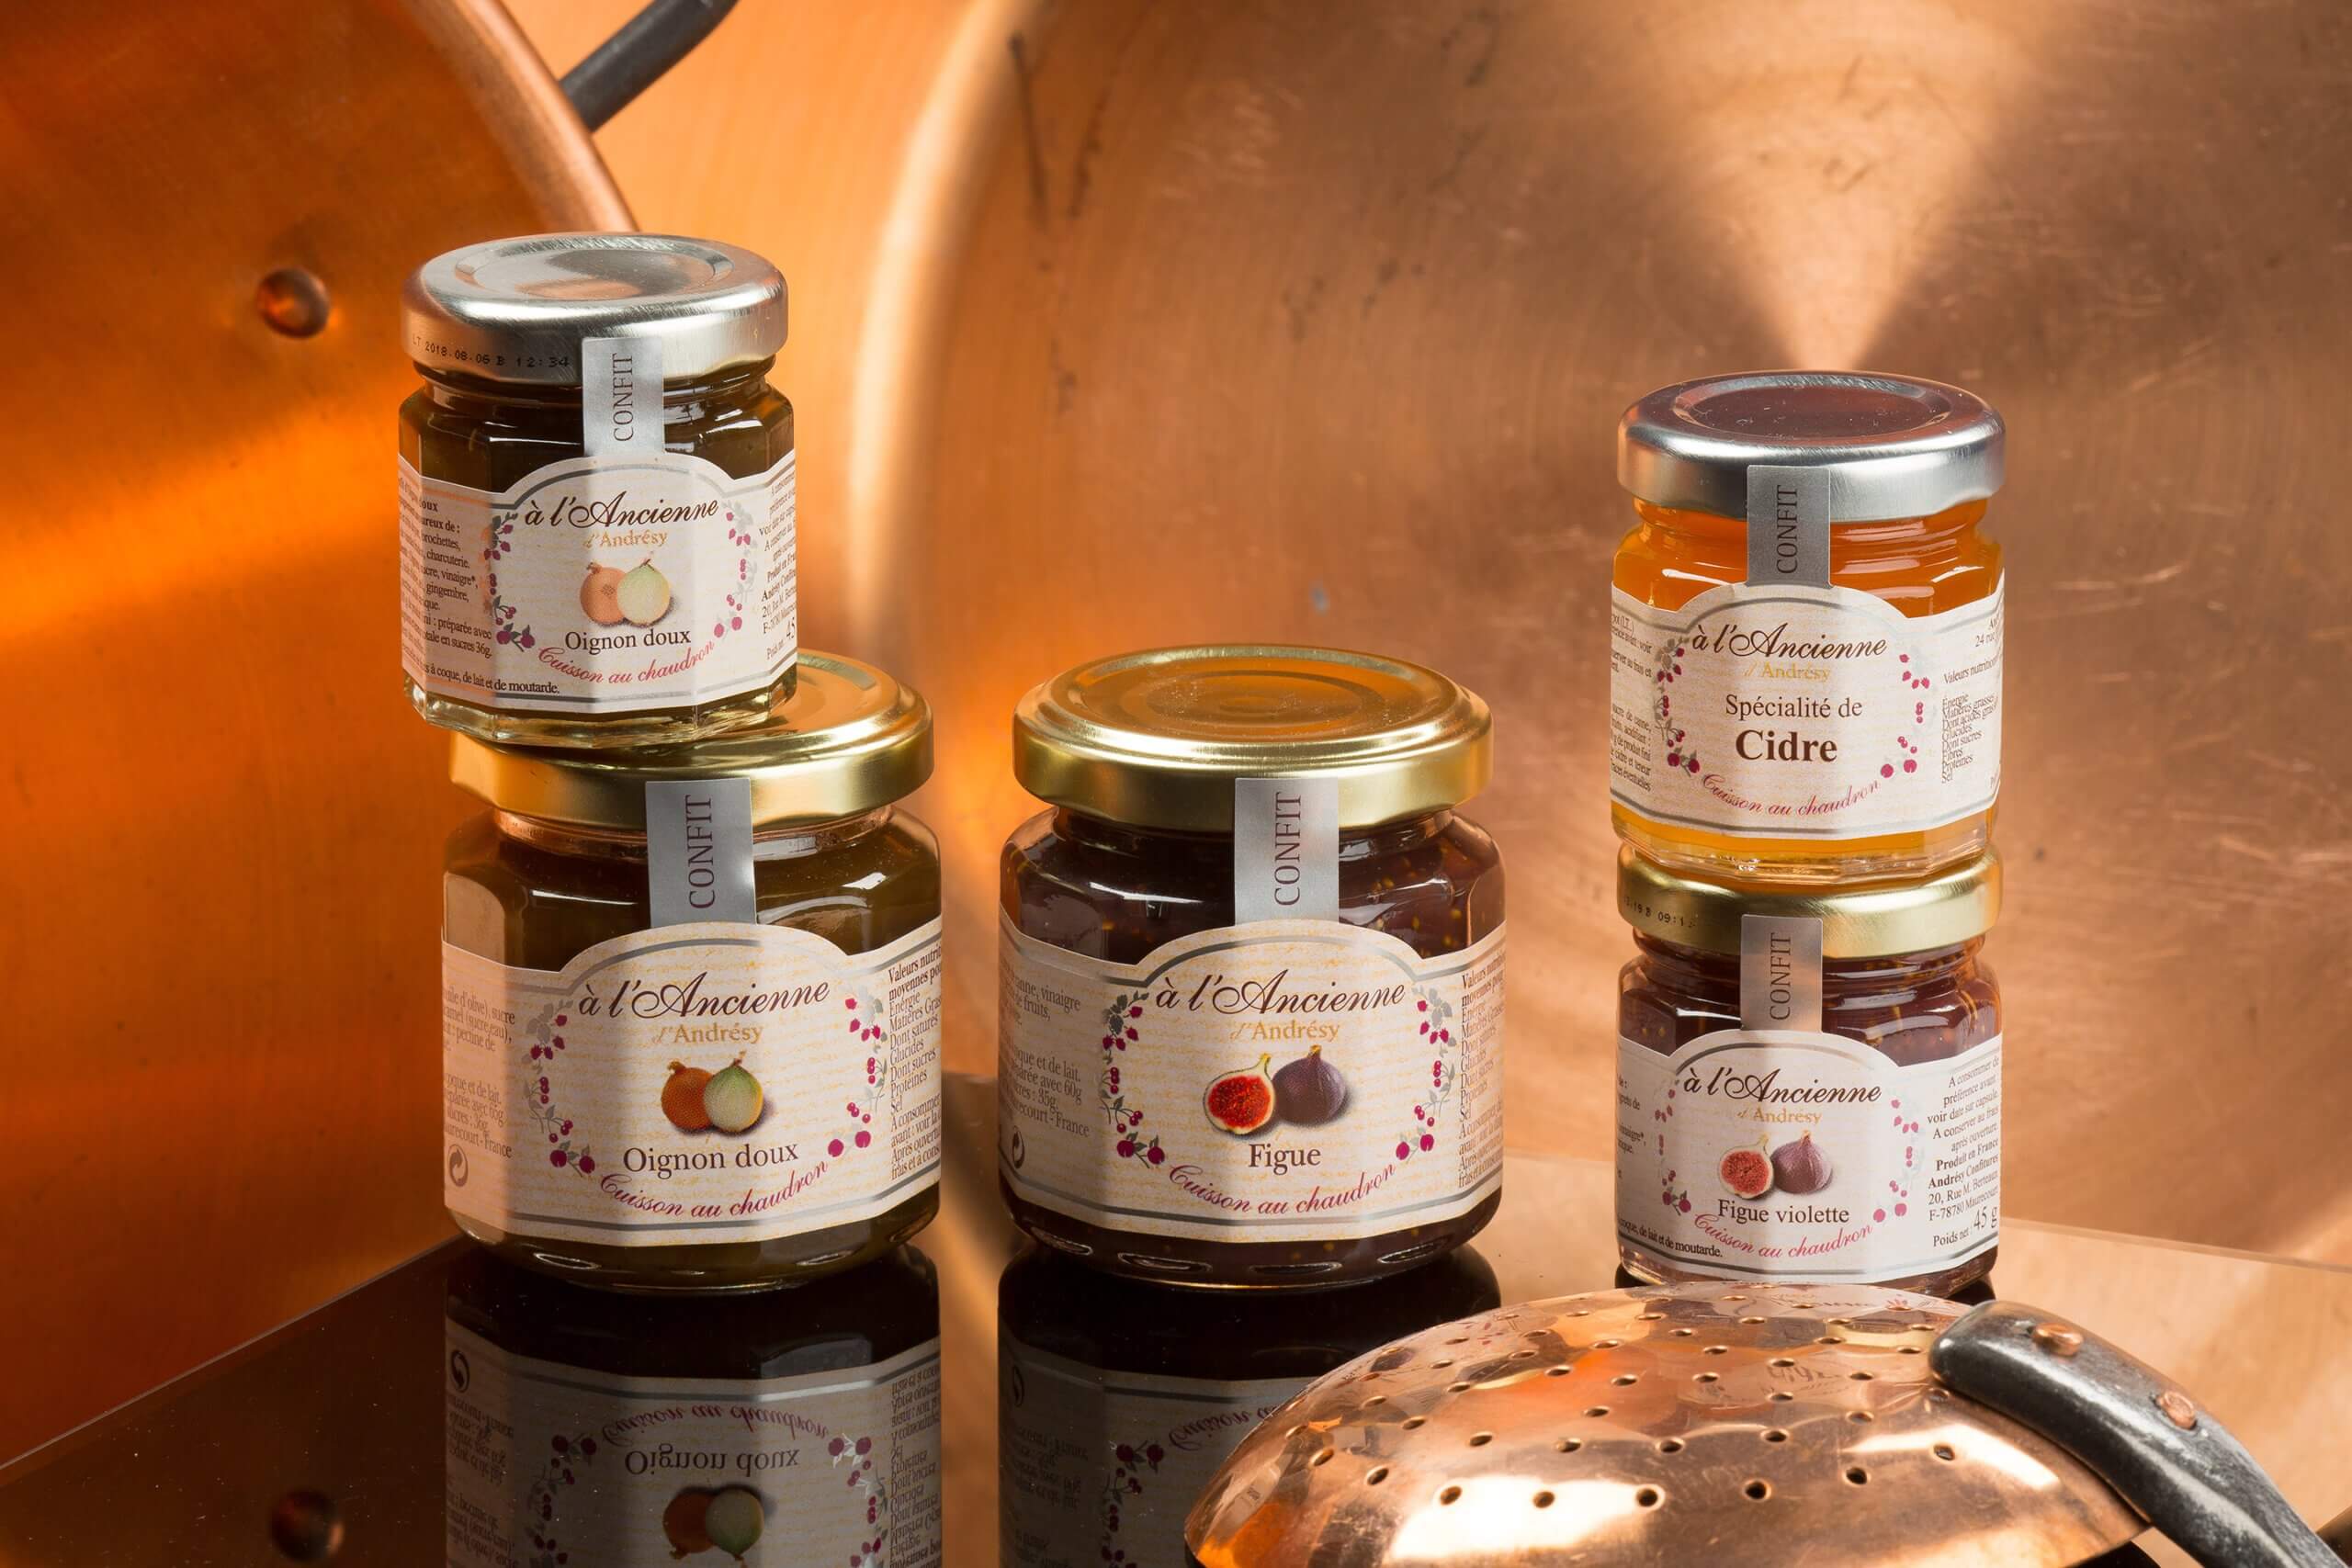 Excellence of jams made in france through the association of craftsmanship and industry at Andrésy Confitures